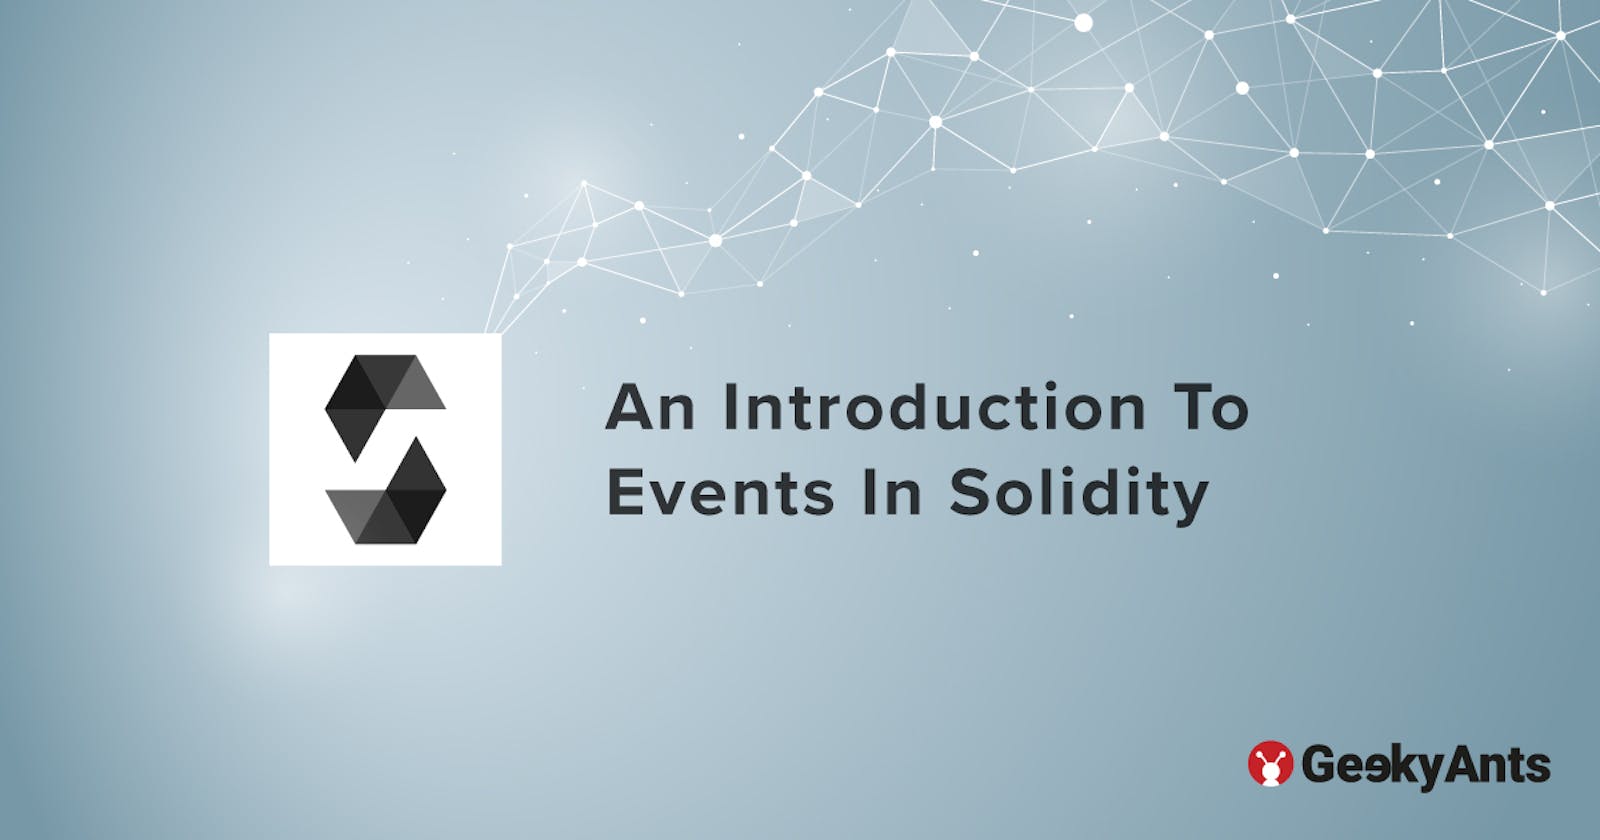 An Introduction To Events In Solidity